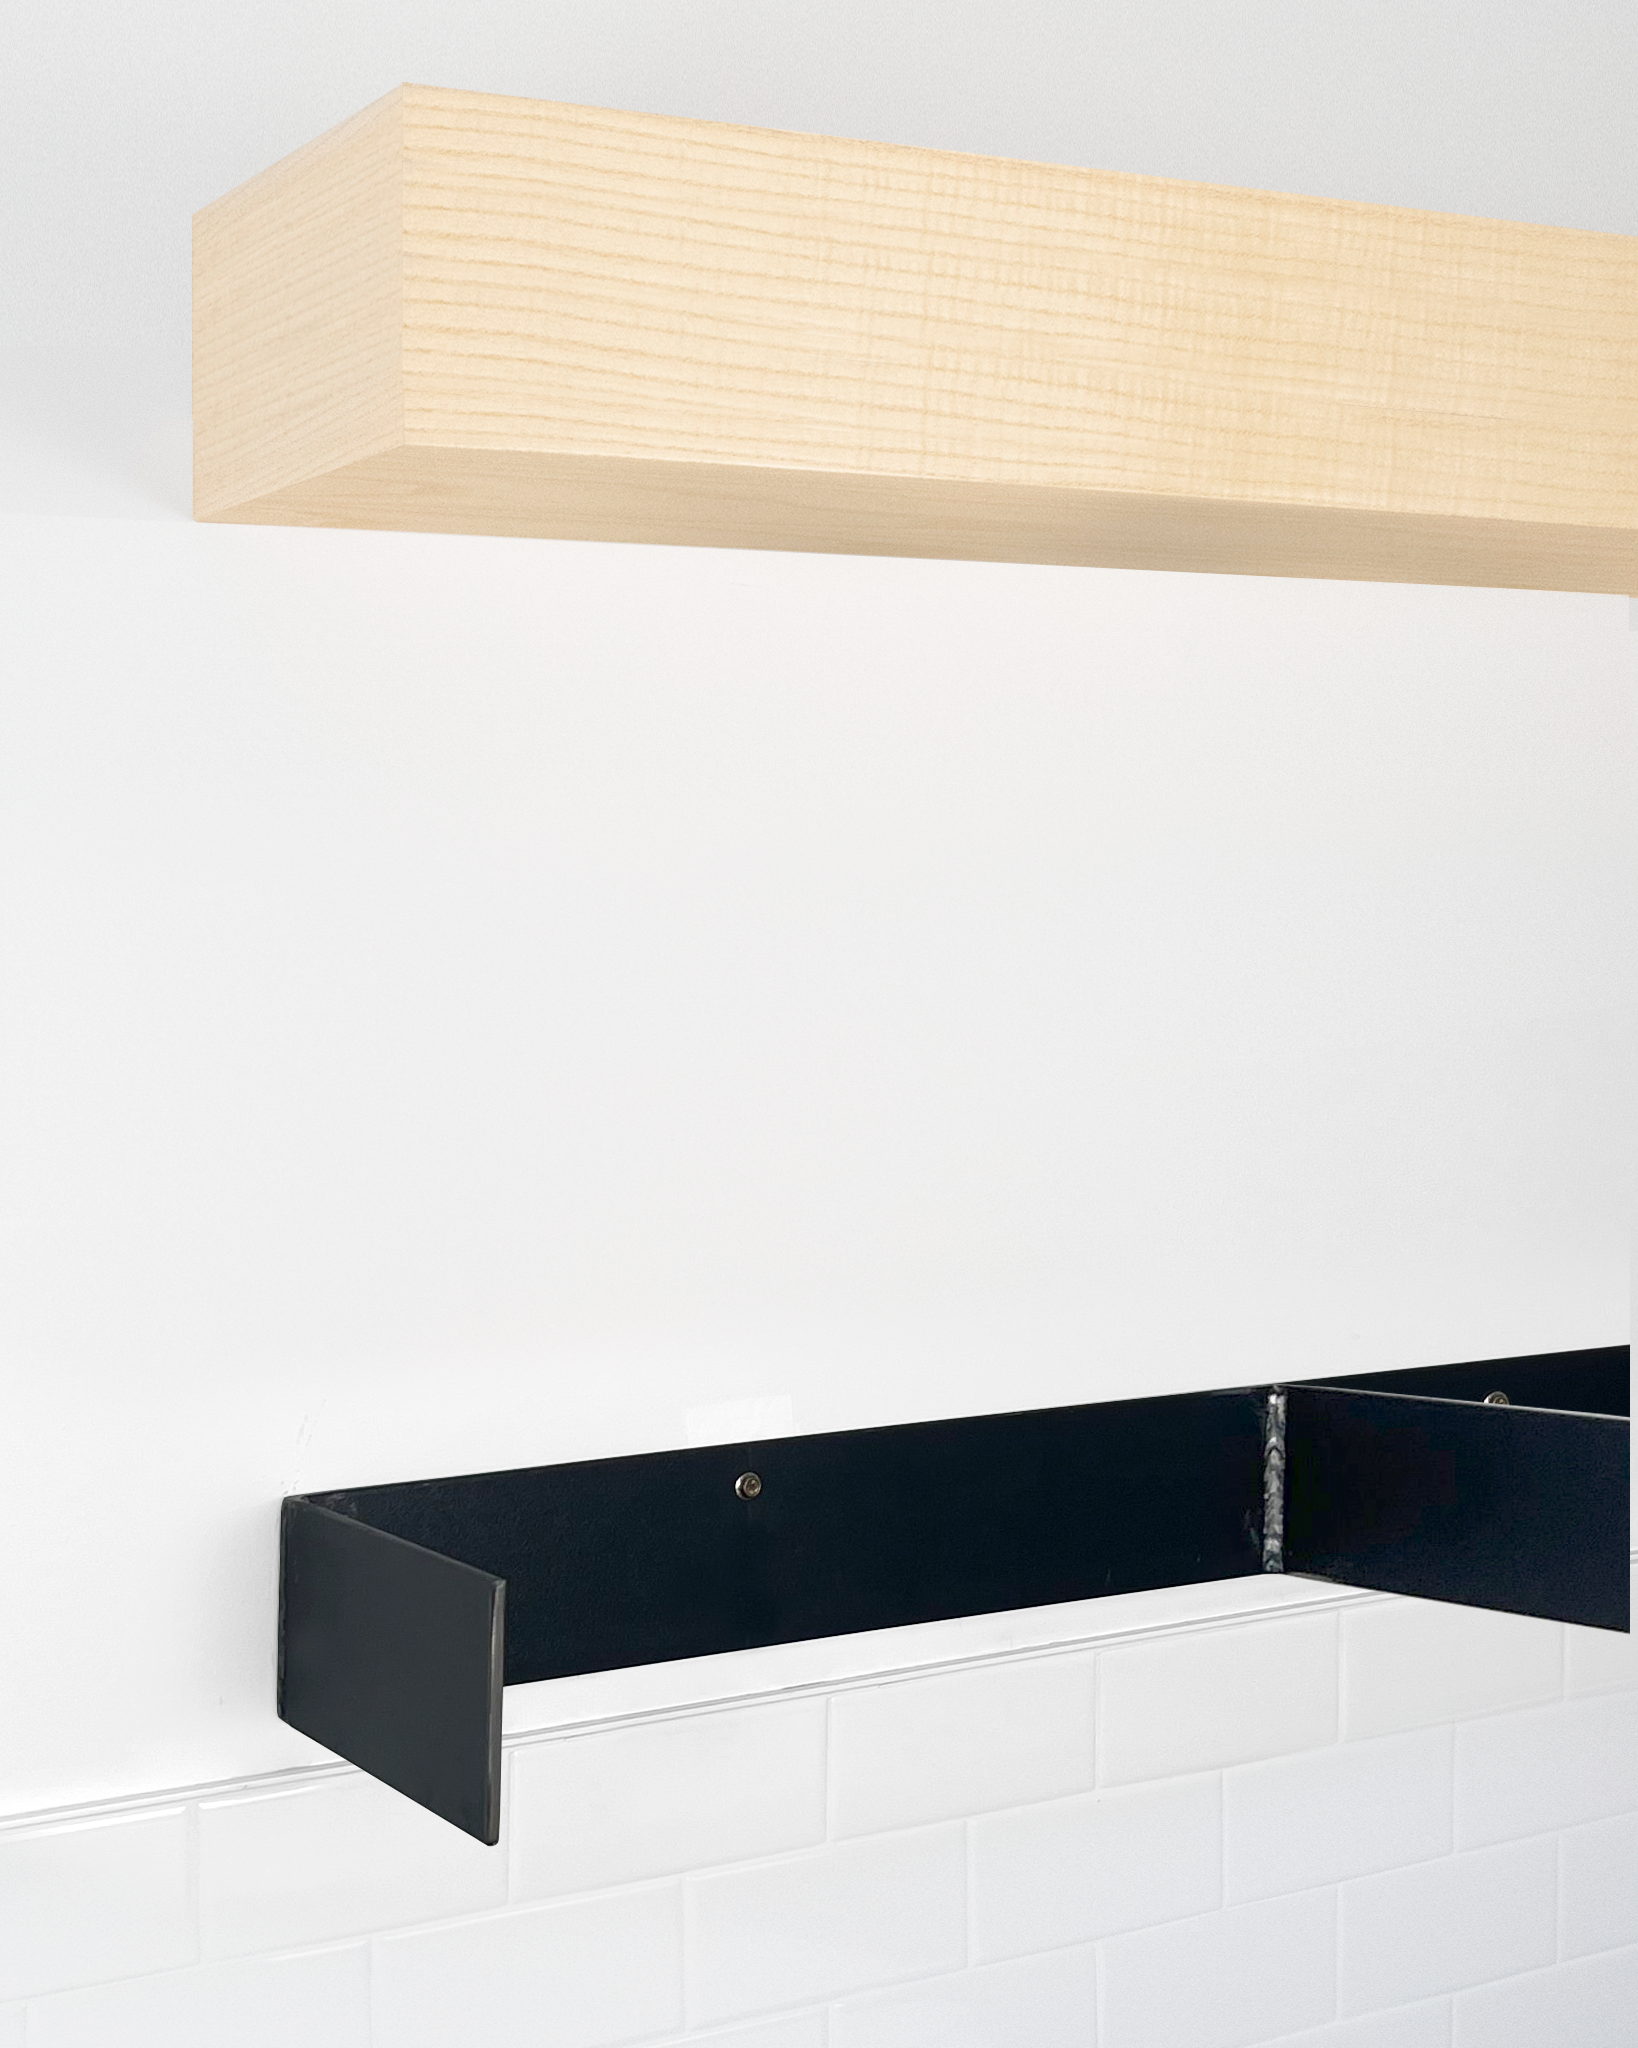 Ash Floating Shelves 4.1-6" thick